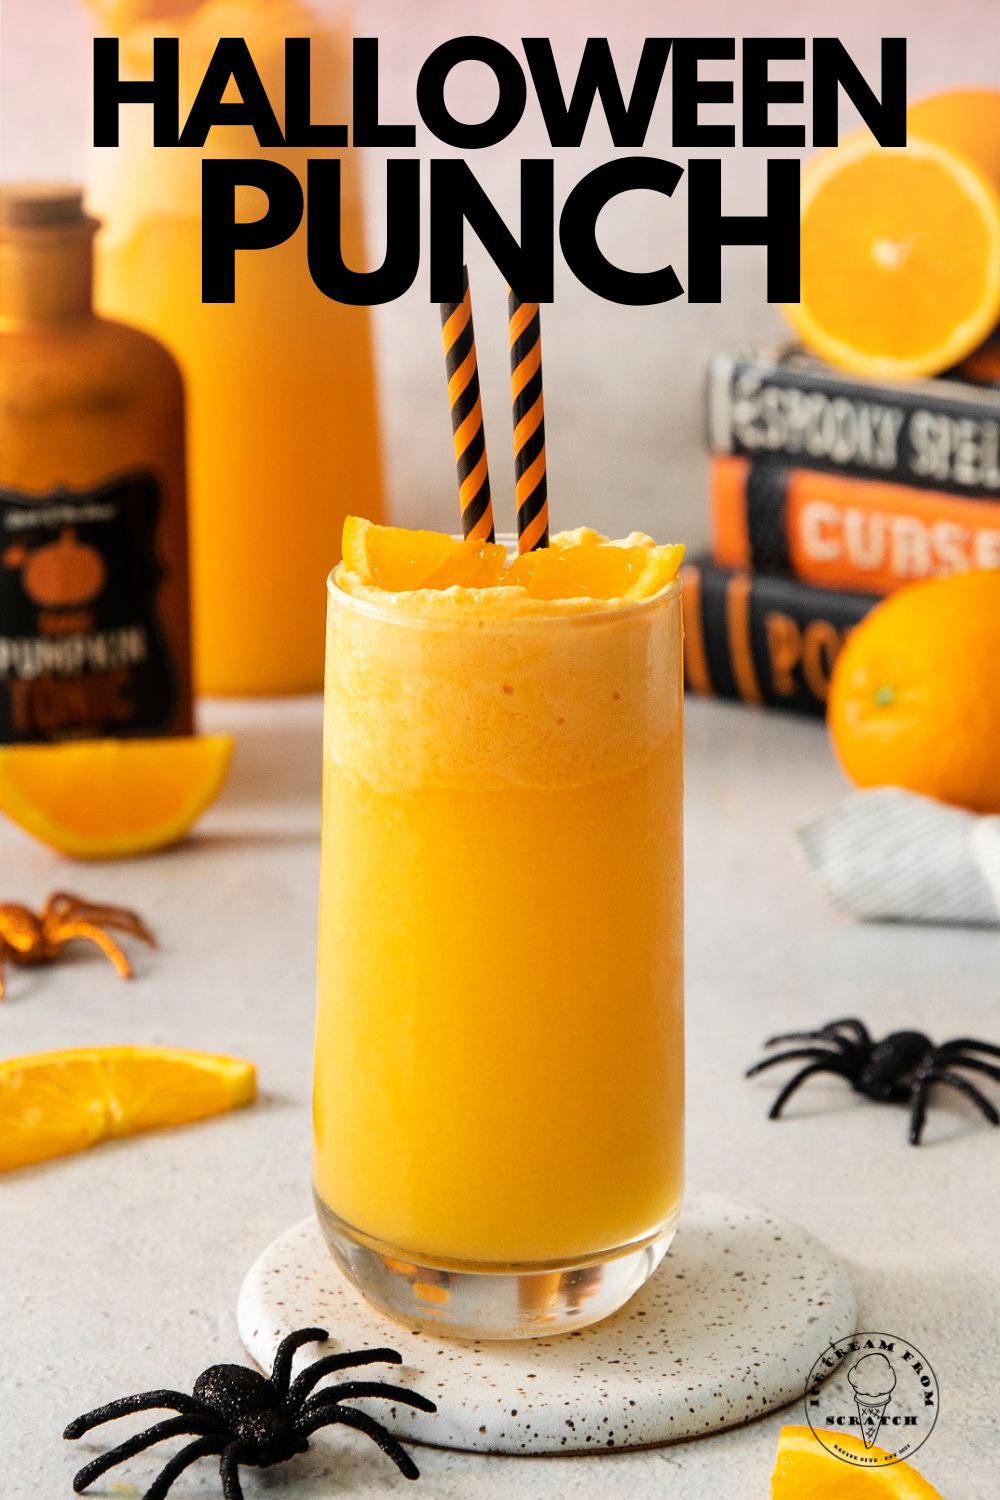 a tall glass filled with orange punch topped with orange sherbet and an orange slice. Text overlay says "halloween punch"